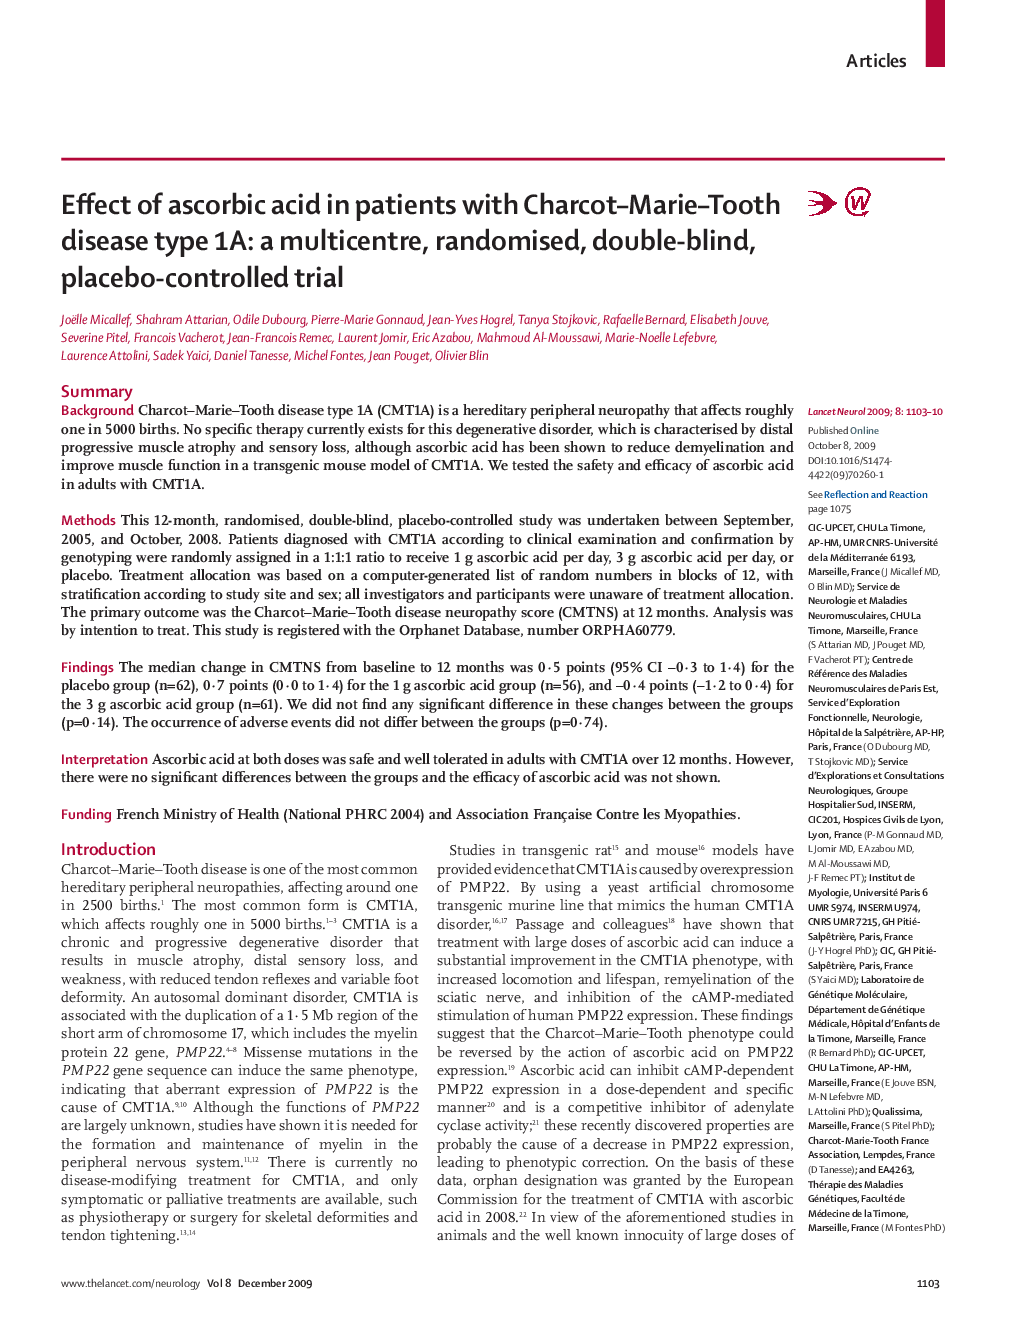 Effect of ascorbic acid in patients with Charcot–Marie–Tooth disease type 1A: a multicentre, randomised, double-blind, placebo-controlled trial